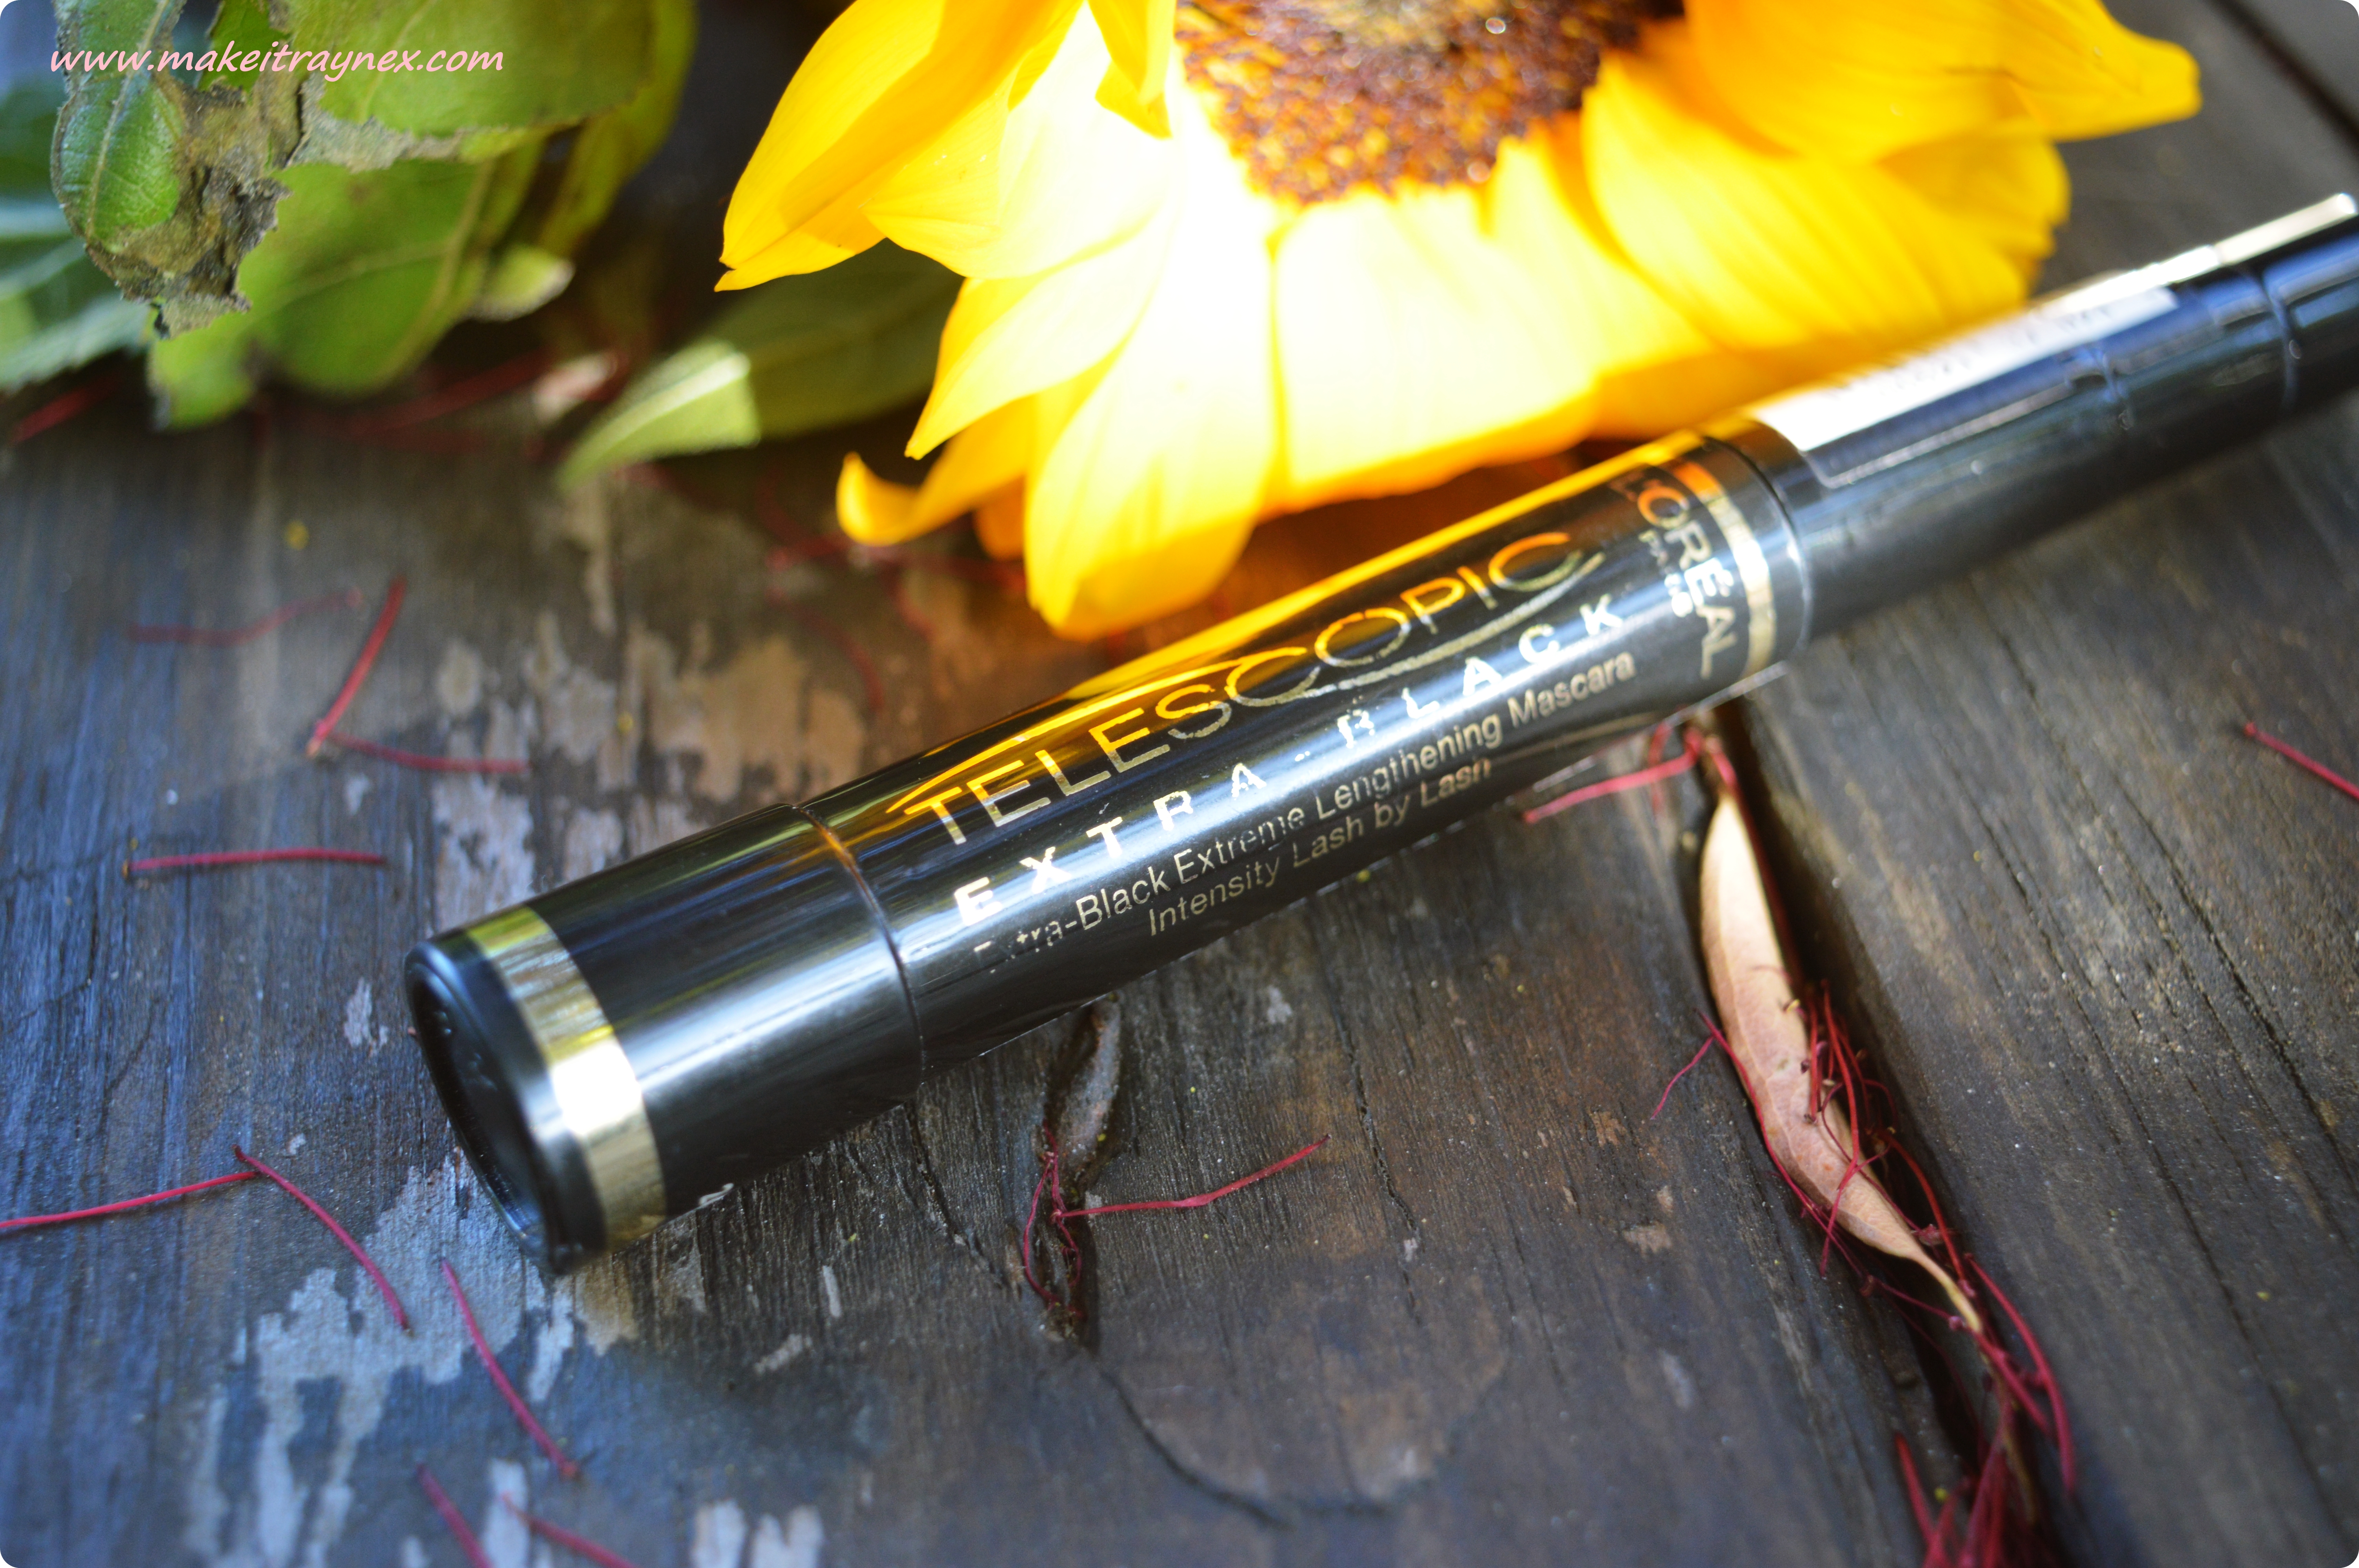 Telescopic Mascara by L'Oreal {REVIEW} - Make It Rayne